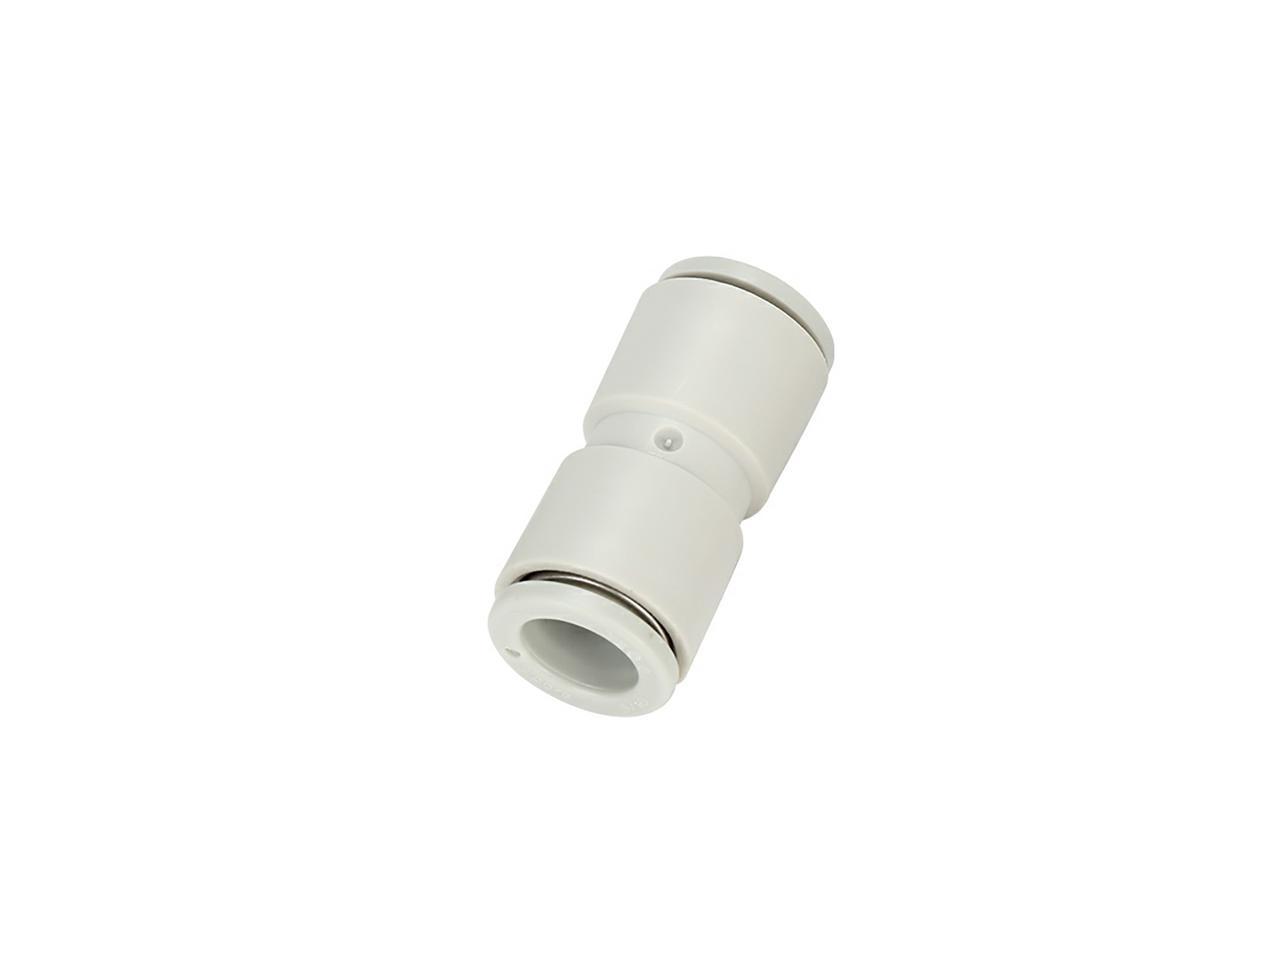 package of 10 SMC KQ2H08-00A connectors str union kq2 fitting family kq2 8mm fitting 